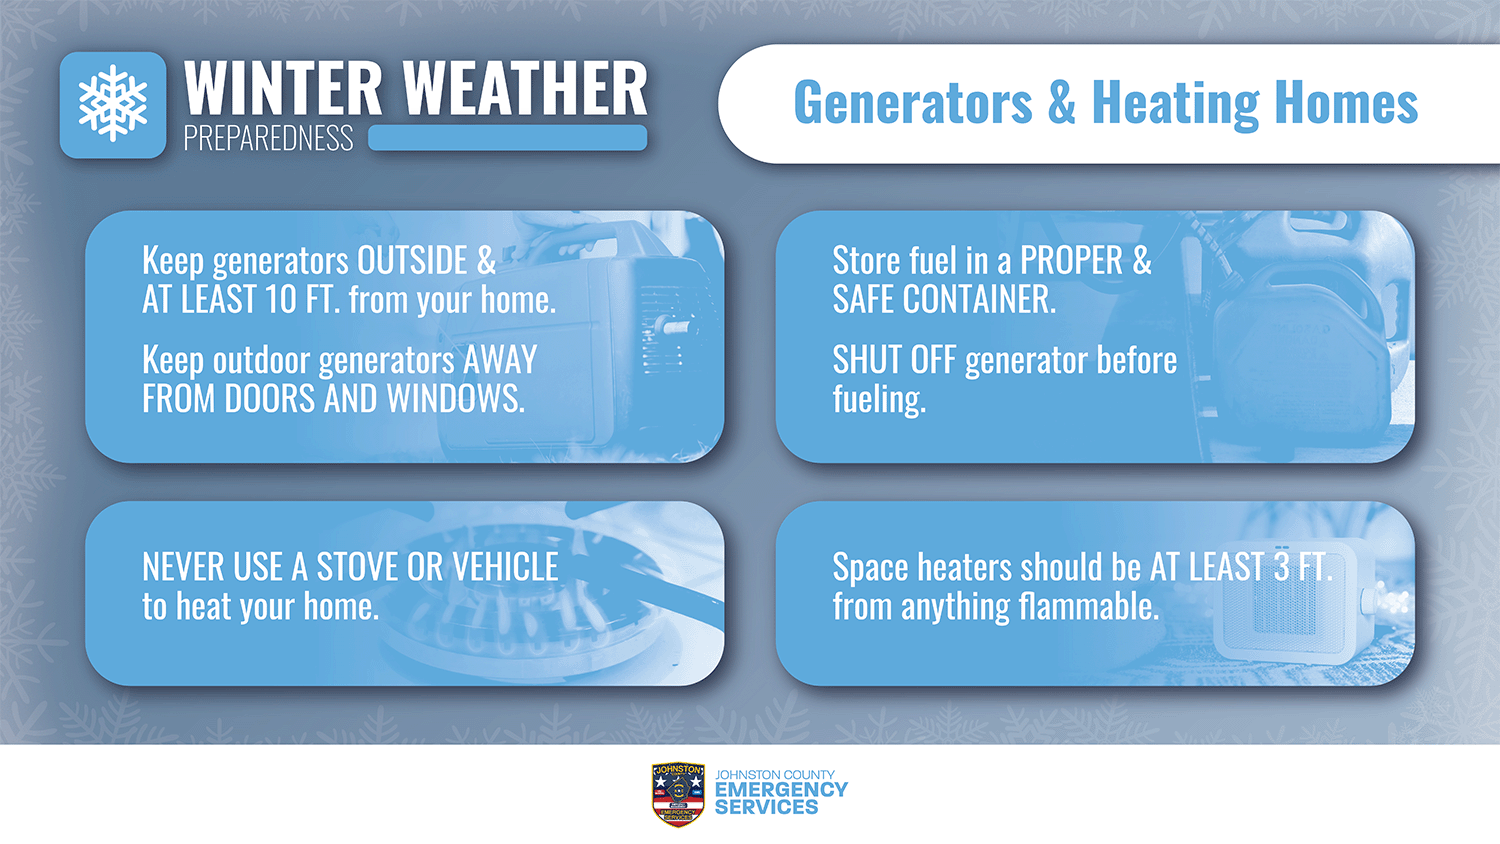 Generators and Heating Homes Infographic